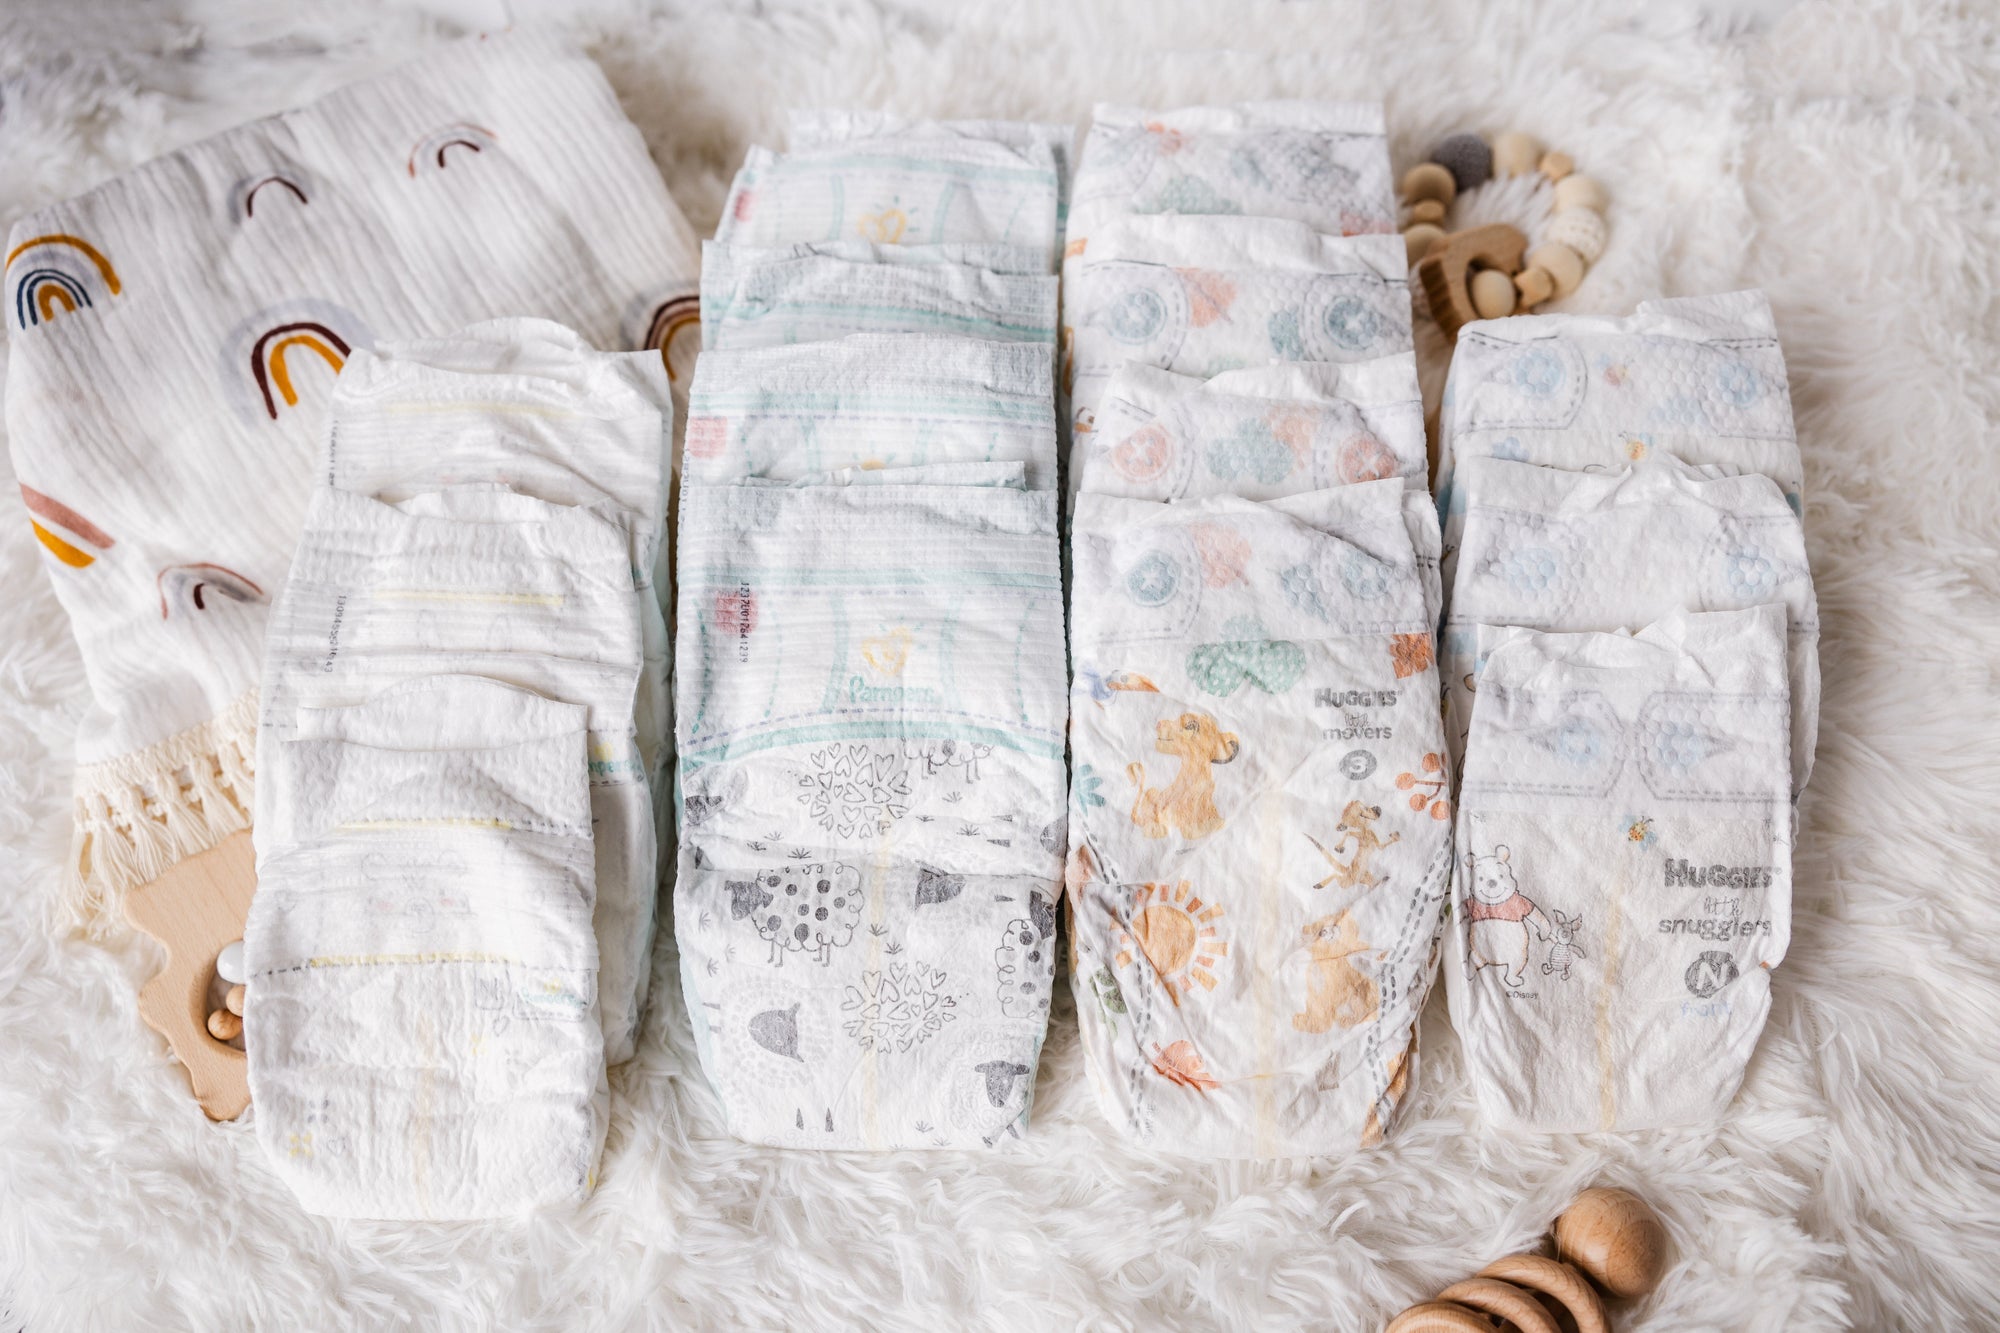 Caregiver's Choice Diaper Sampler Package: 14 Diaper Sample Packs of diapers in every size including Huggies Little Movers, Pampers Cruisers, Huggies Little Snugglers and Pampers Swaddlers